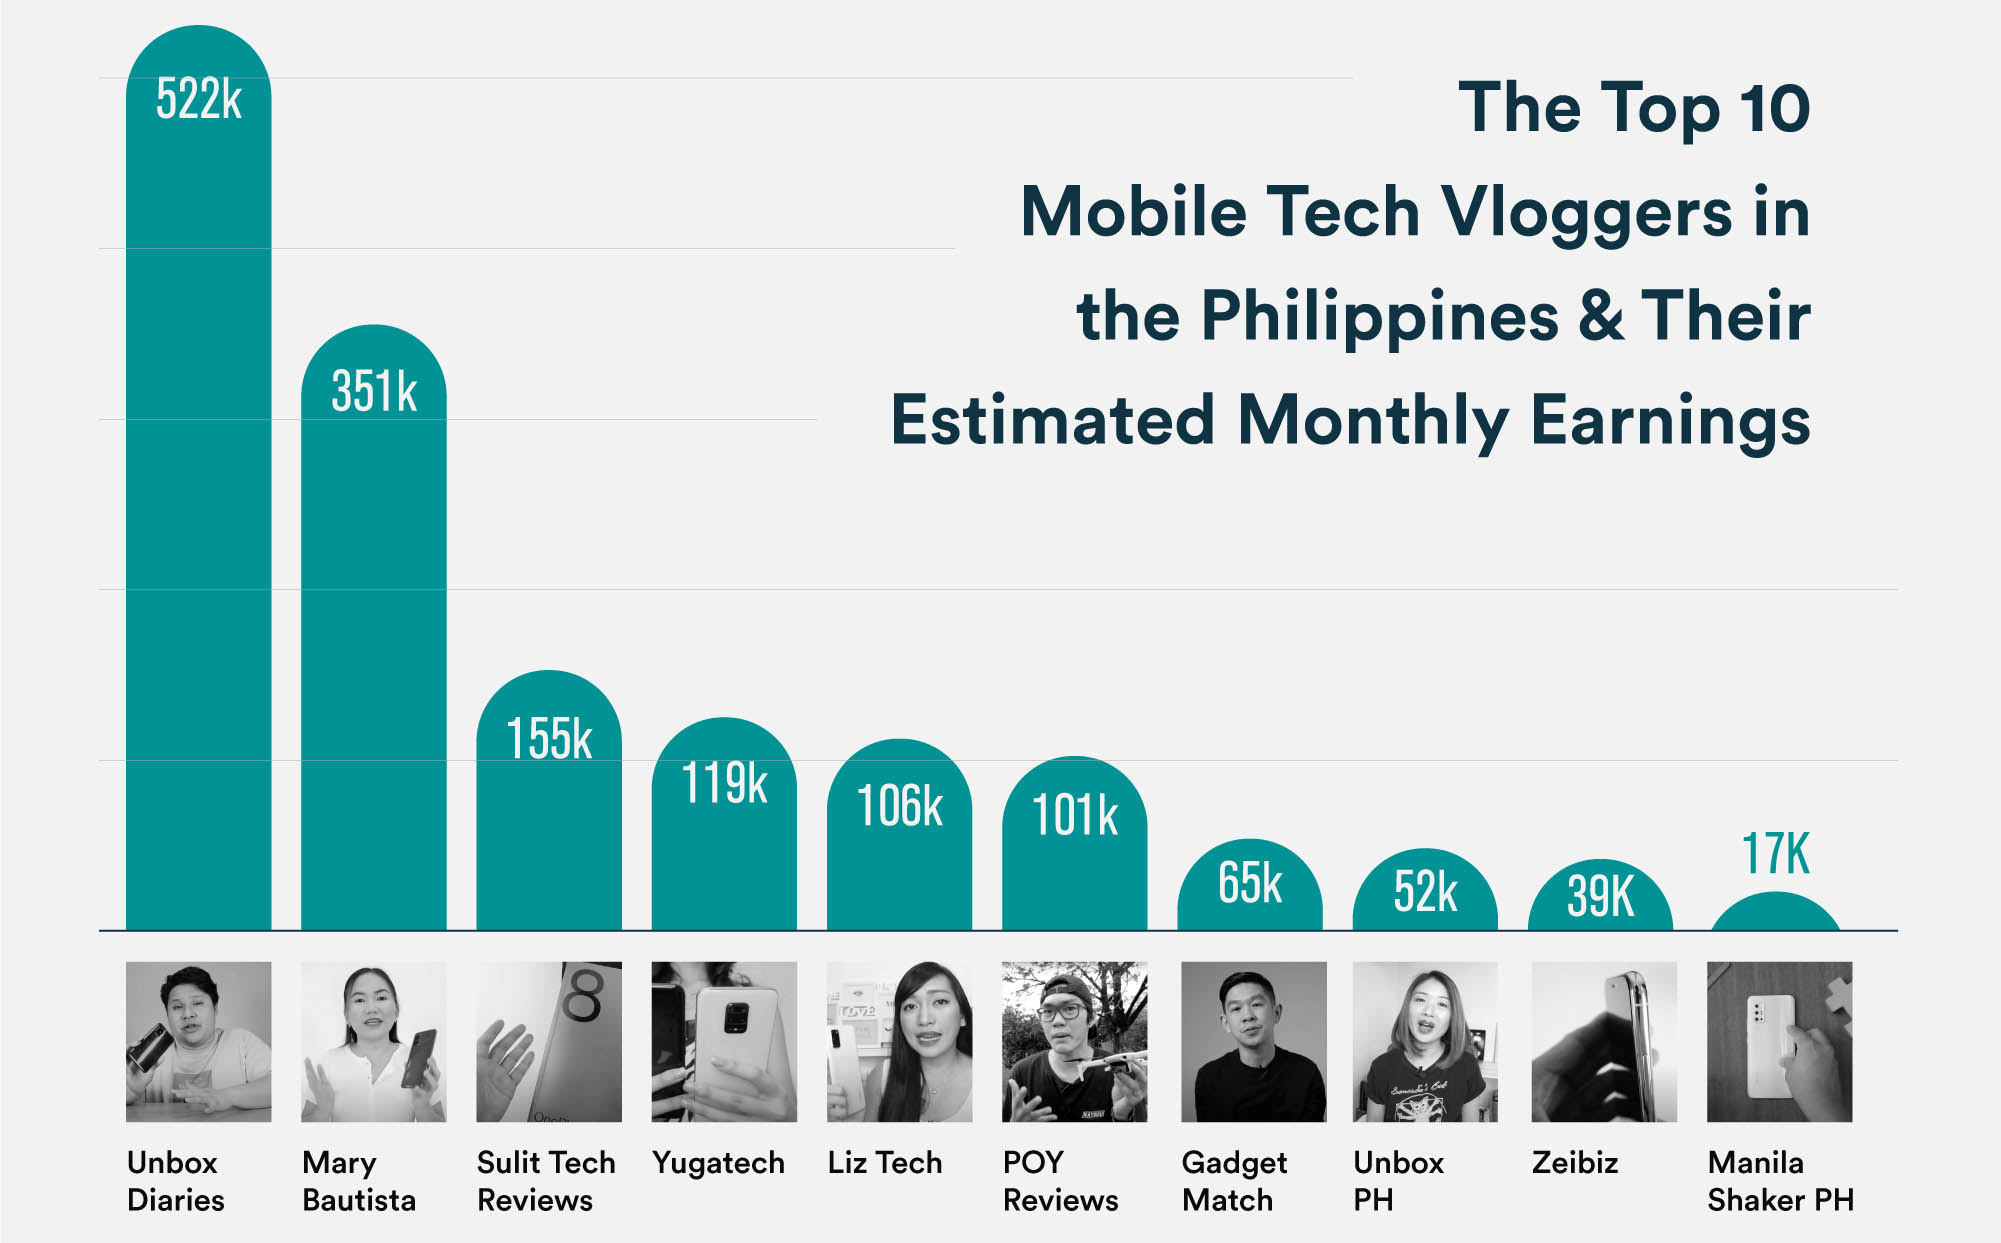 Tech Vlogging in the Philippines can earn you up to Php522k/month, but not for long